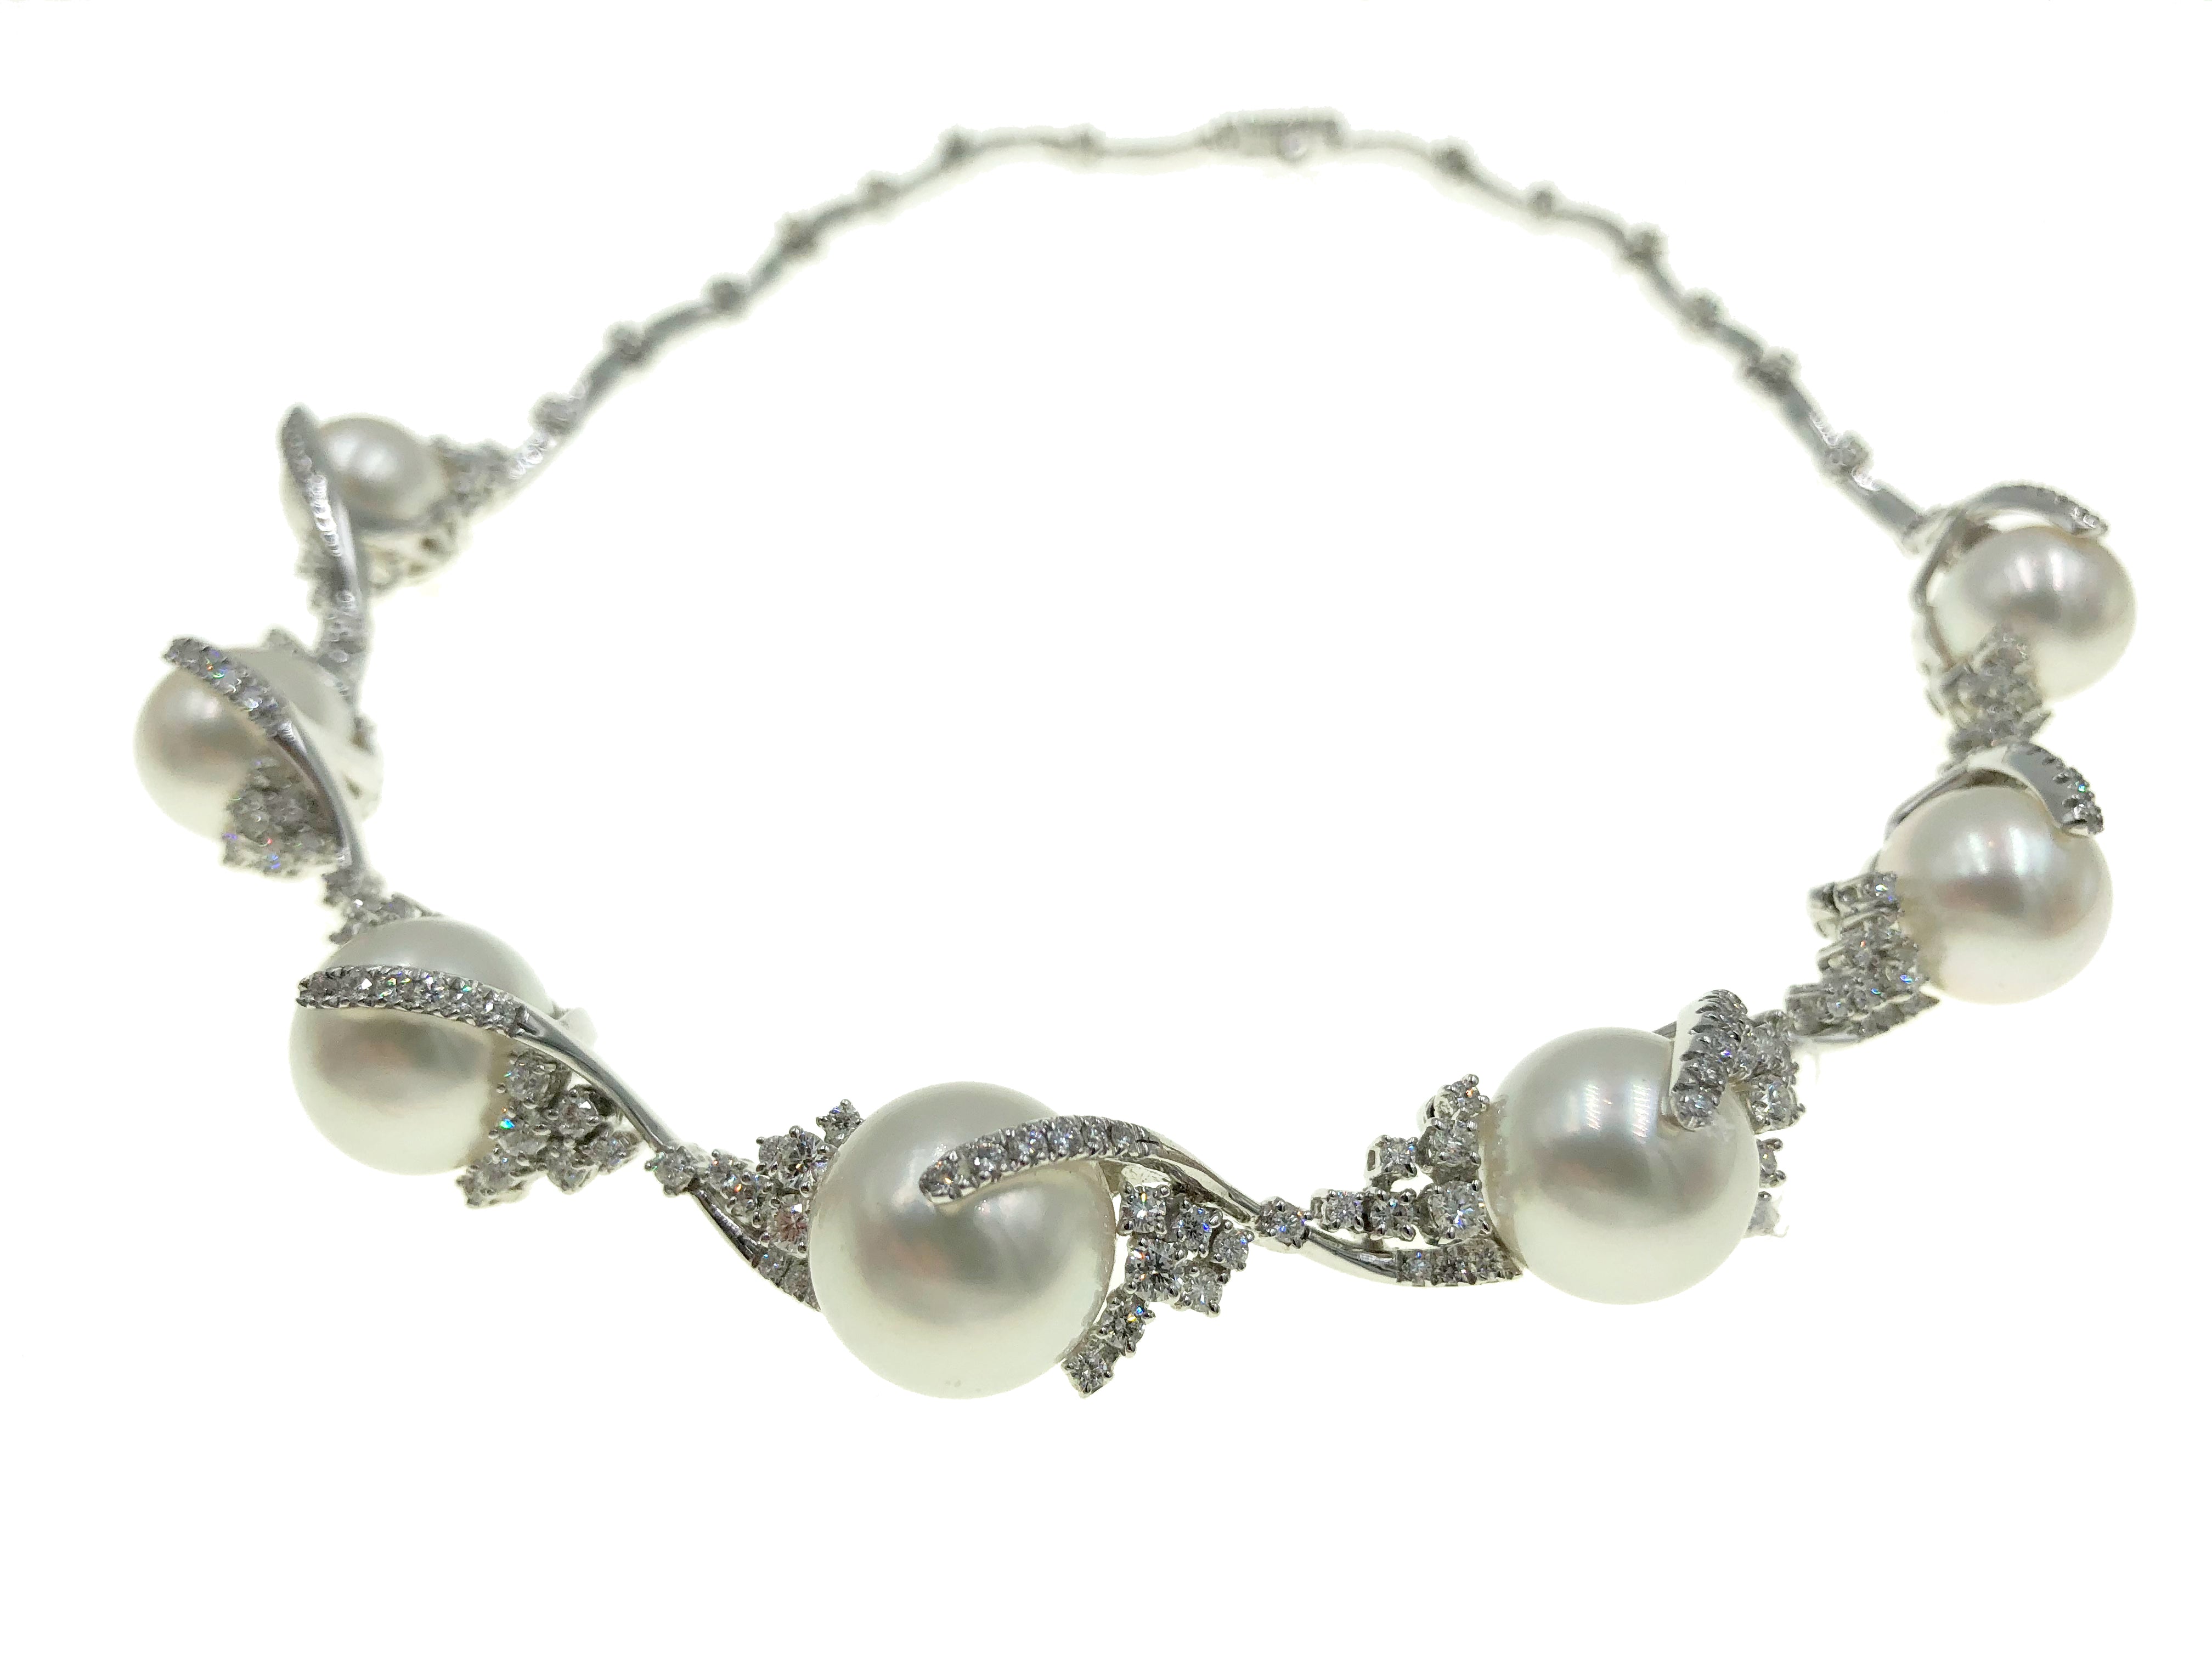 Diamond and South Sea Pearl Necklace